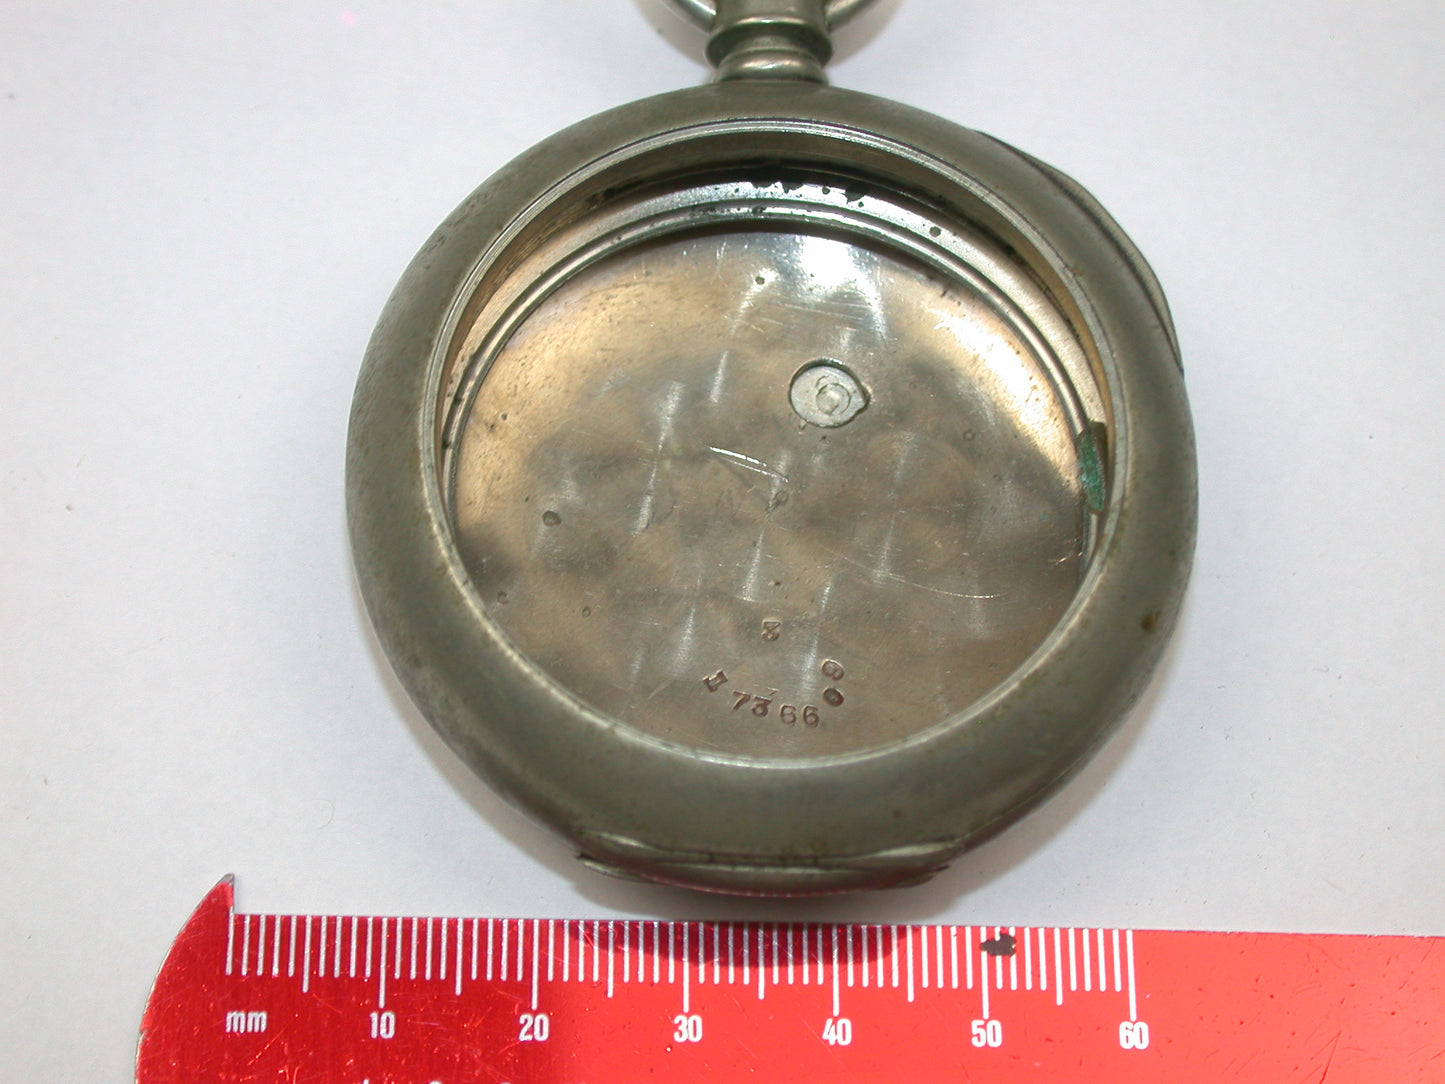 Lot 42- Dueber Key Wind Hinged Cover Nickel Pocket Watch Case